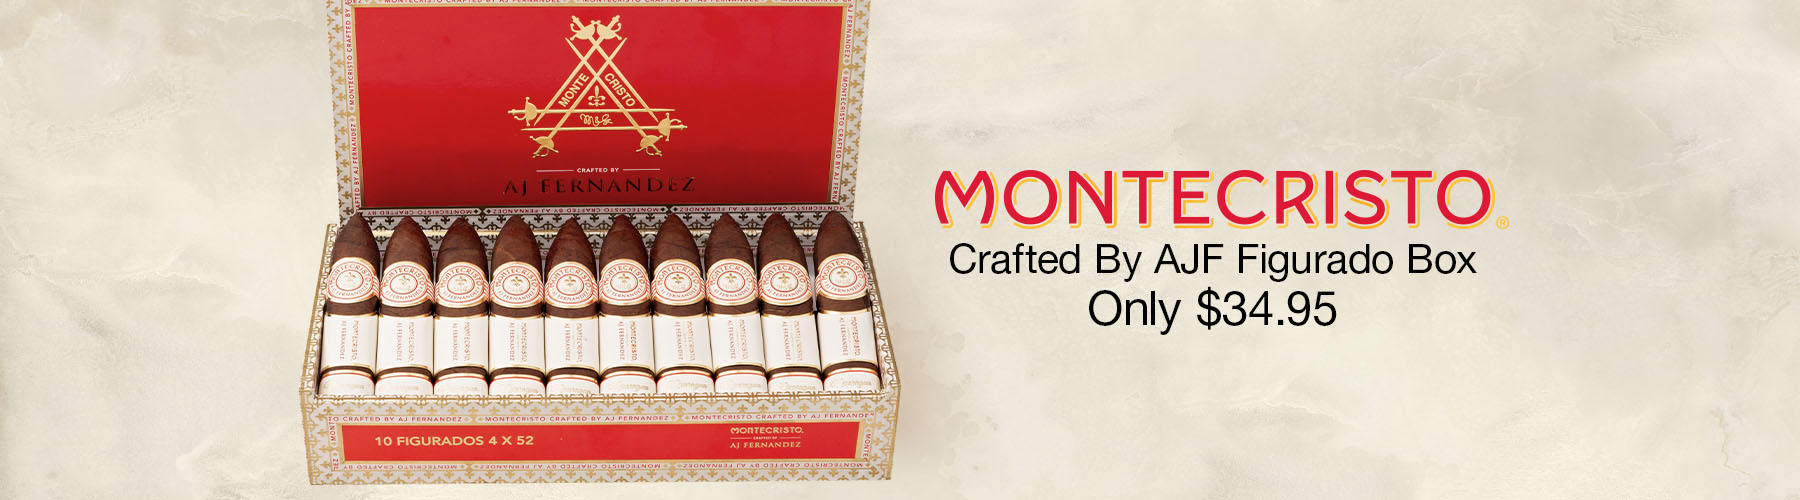 Montecristo Crafted by AJF Figurado Box 
Only $39.95